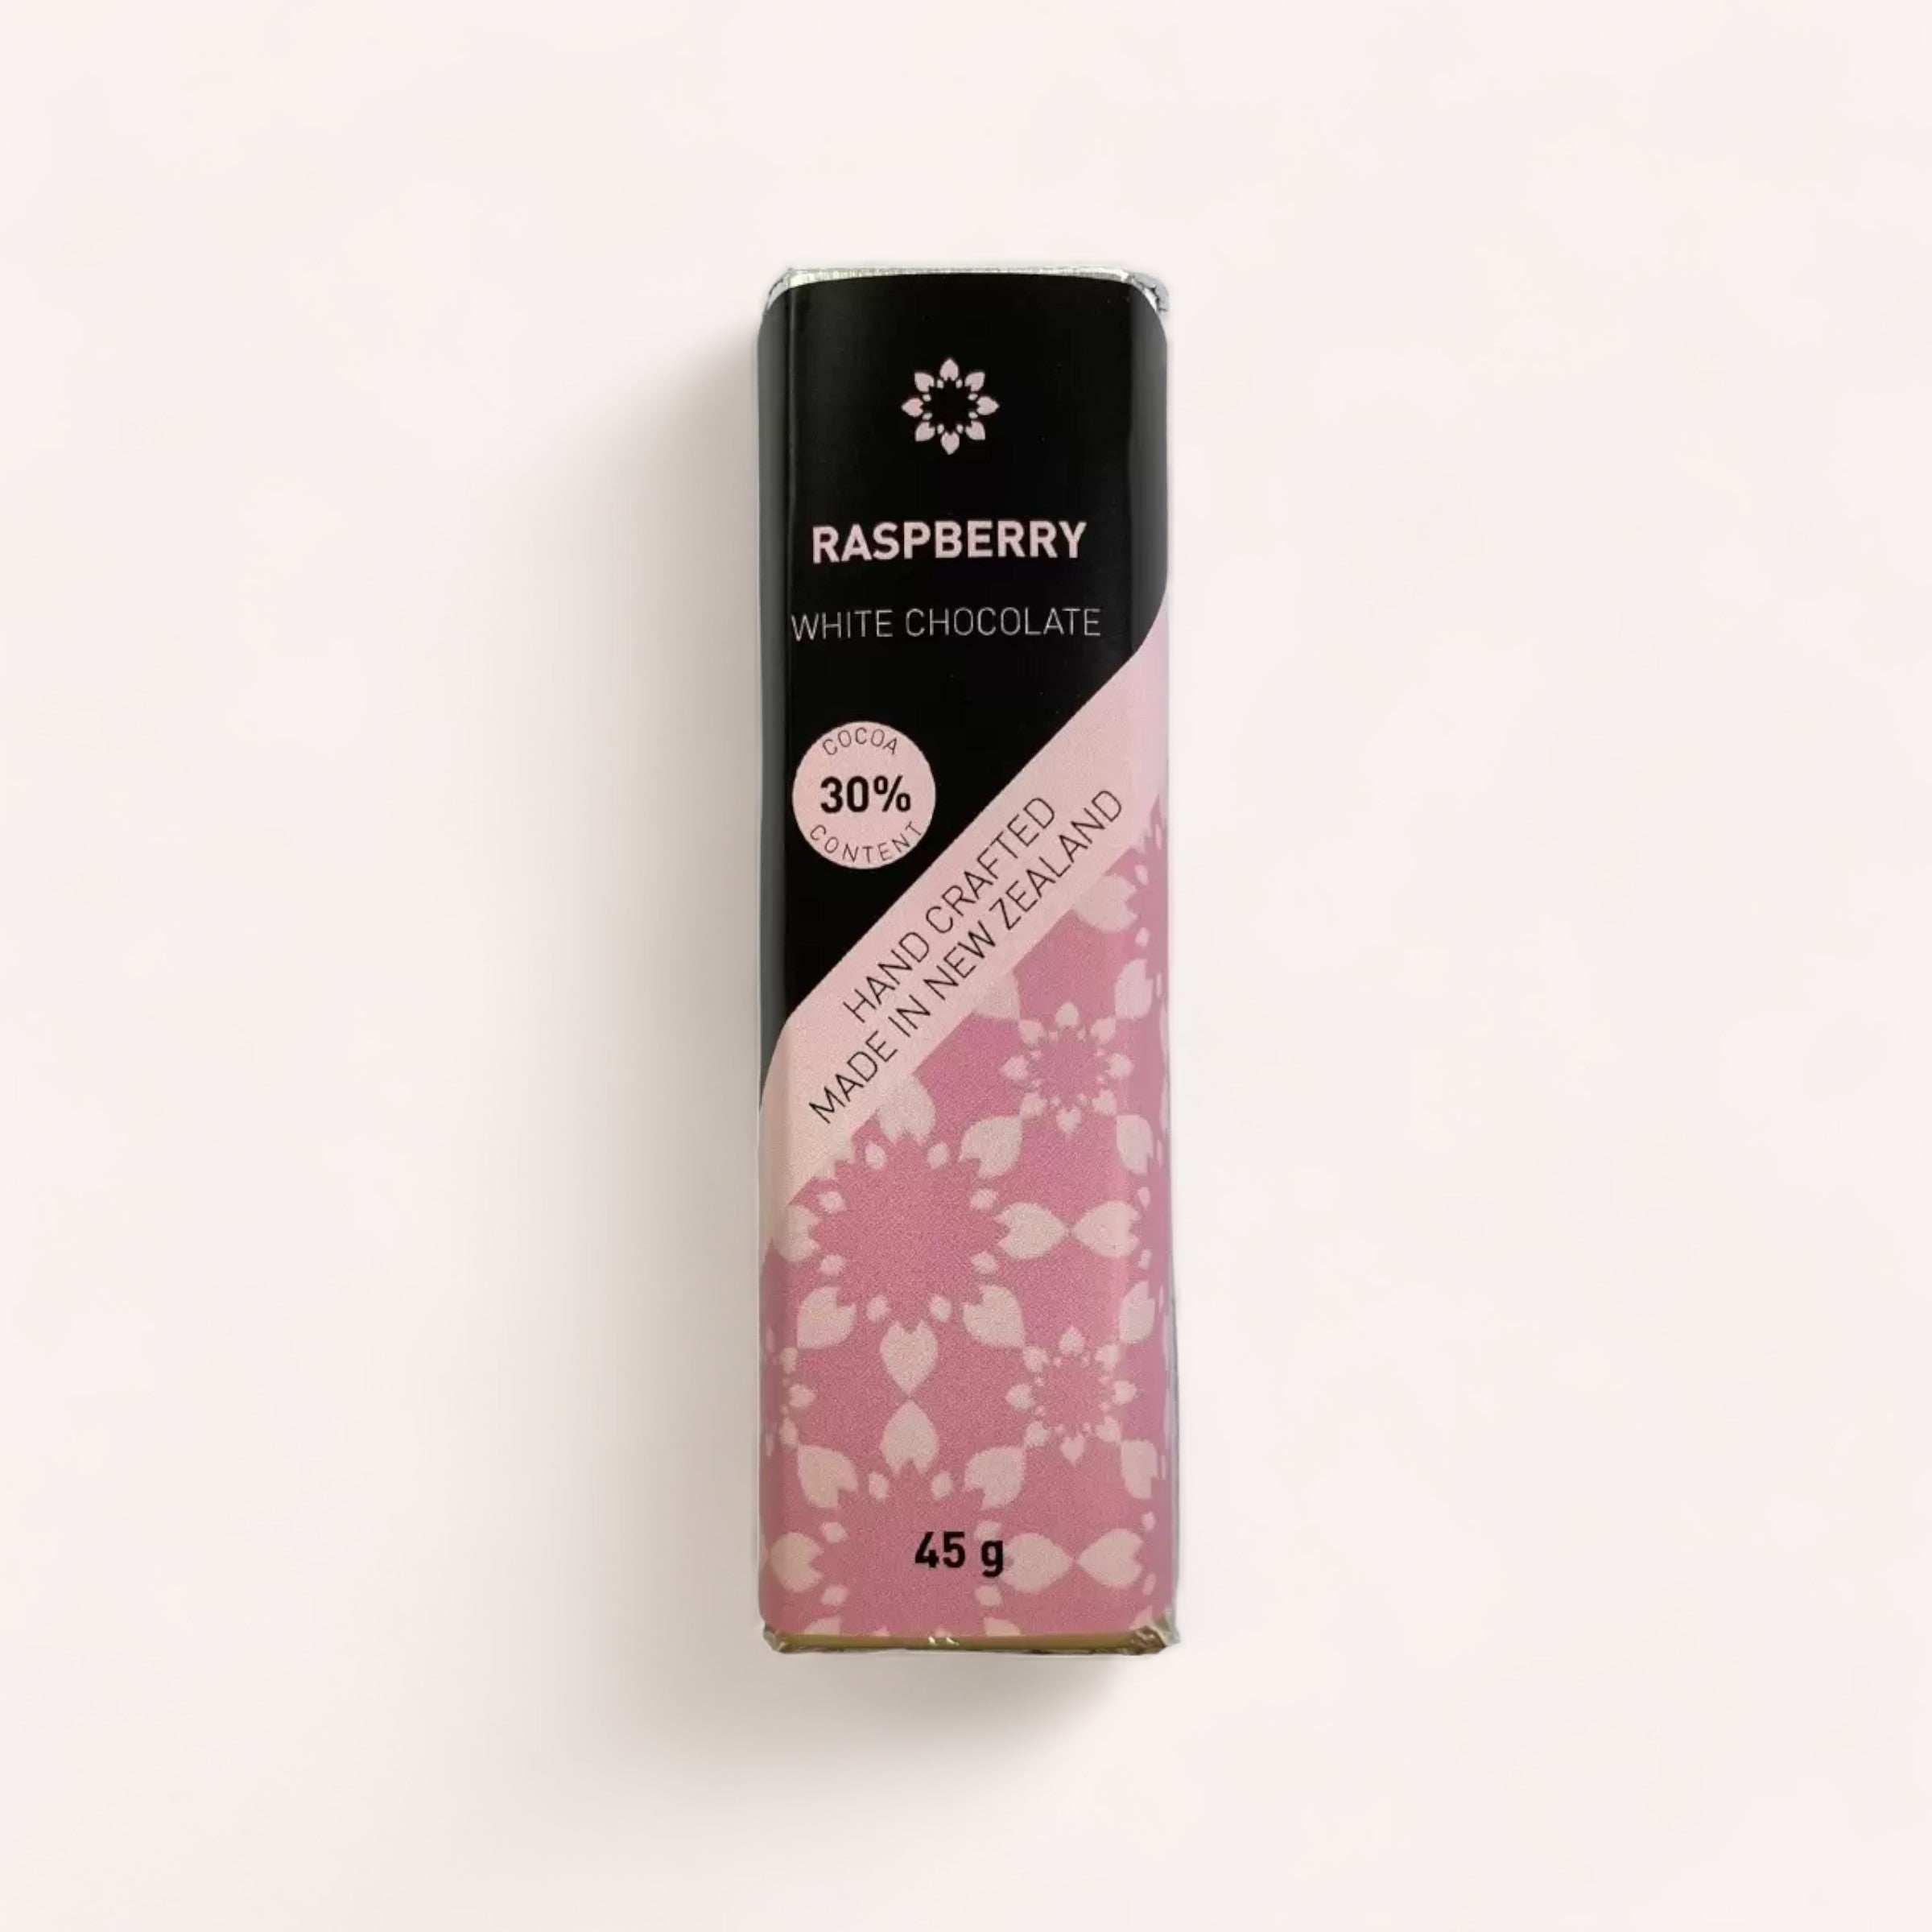 A bar of Raspberry White Chocolate bar with a 30% cocoa content, handcrafted and presented in a package with pink floral patterns, weighing 45 grams. This exquisite Product of New Zealand is by Chocolate Traders.